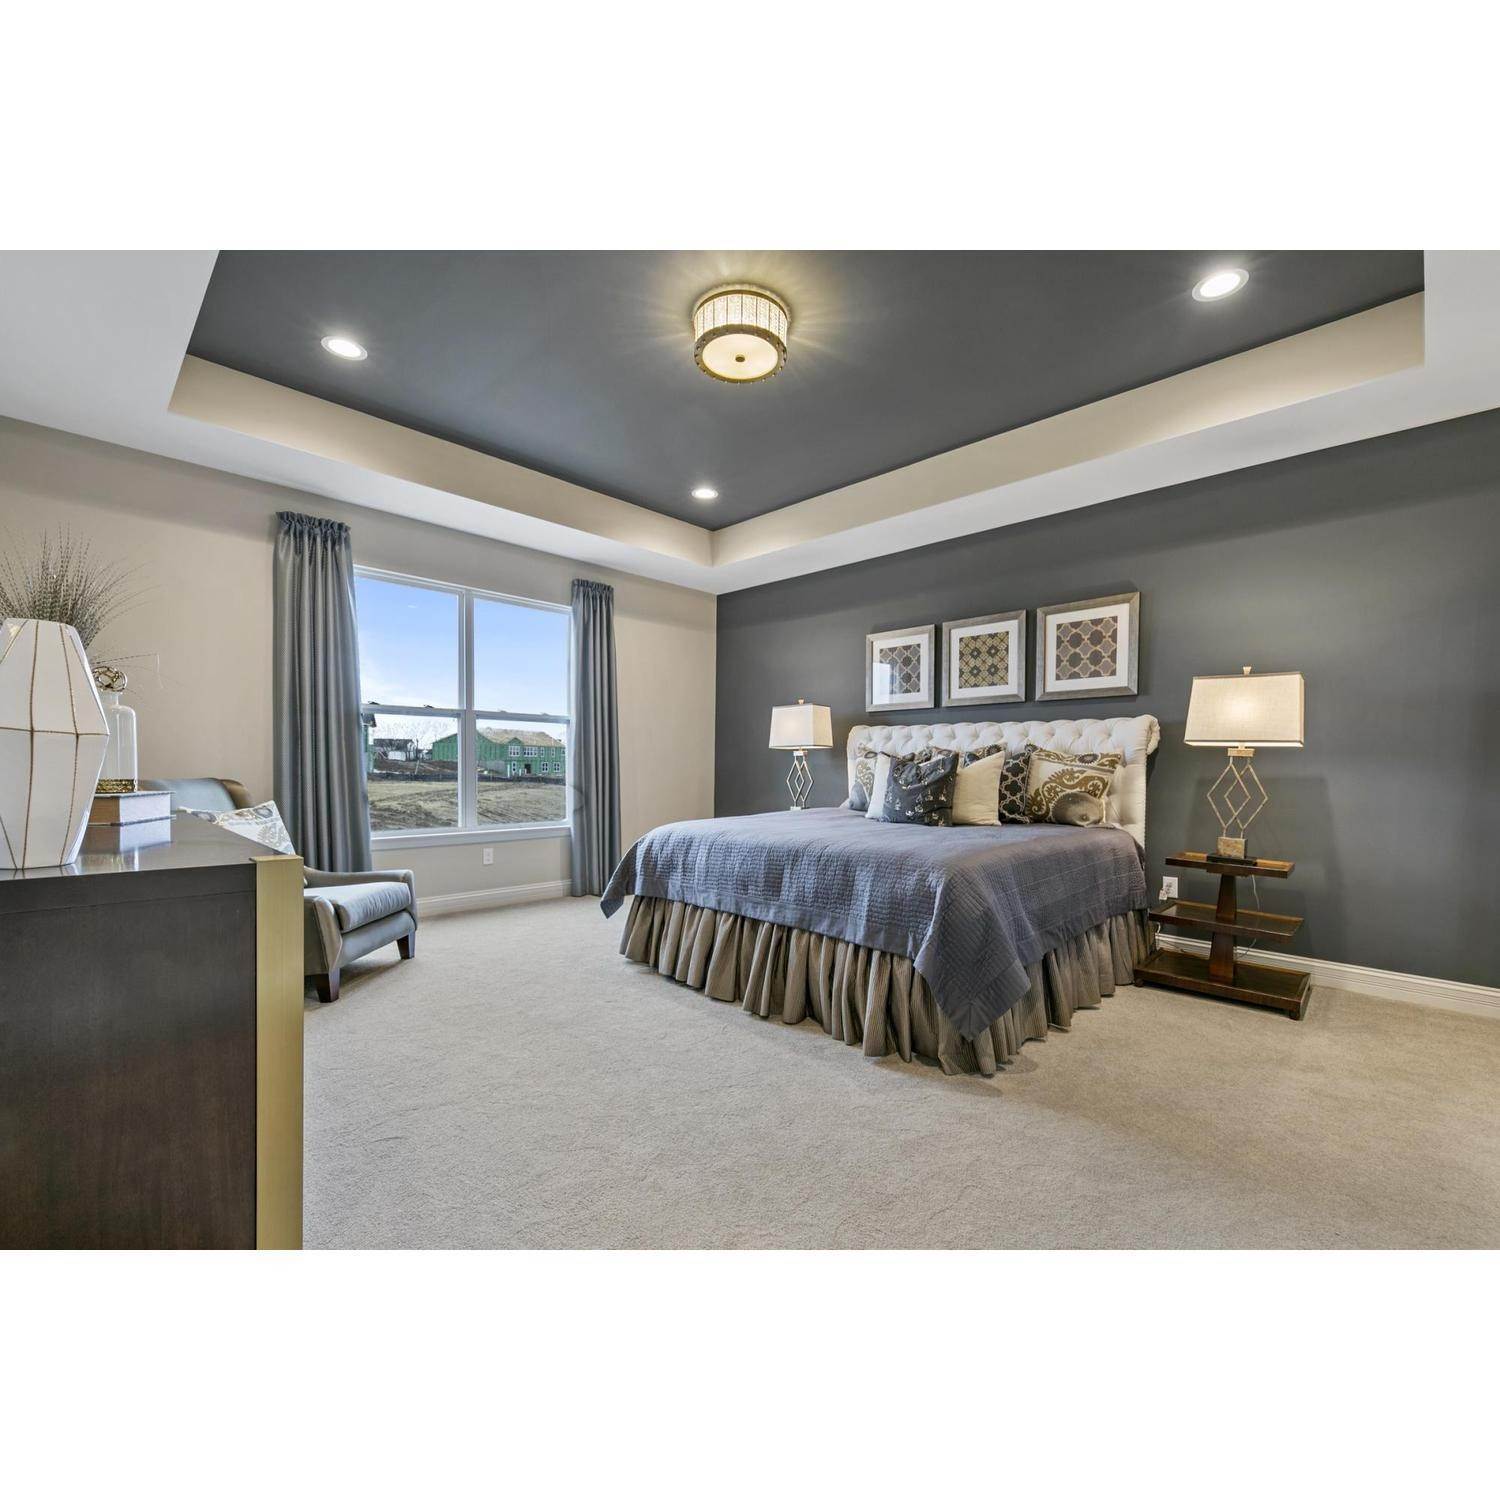 27. xây dựng tại 100 Royal Inverness Parkway, Dardenne Prairie, MO 63368